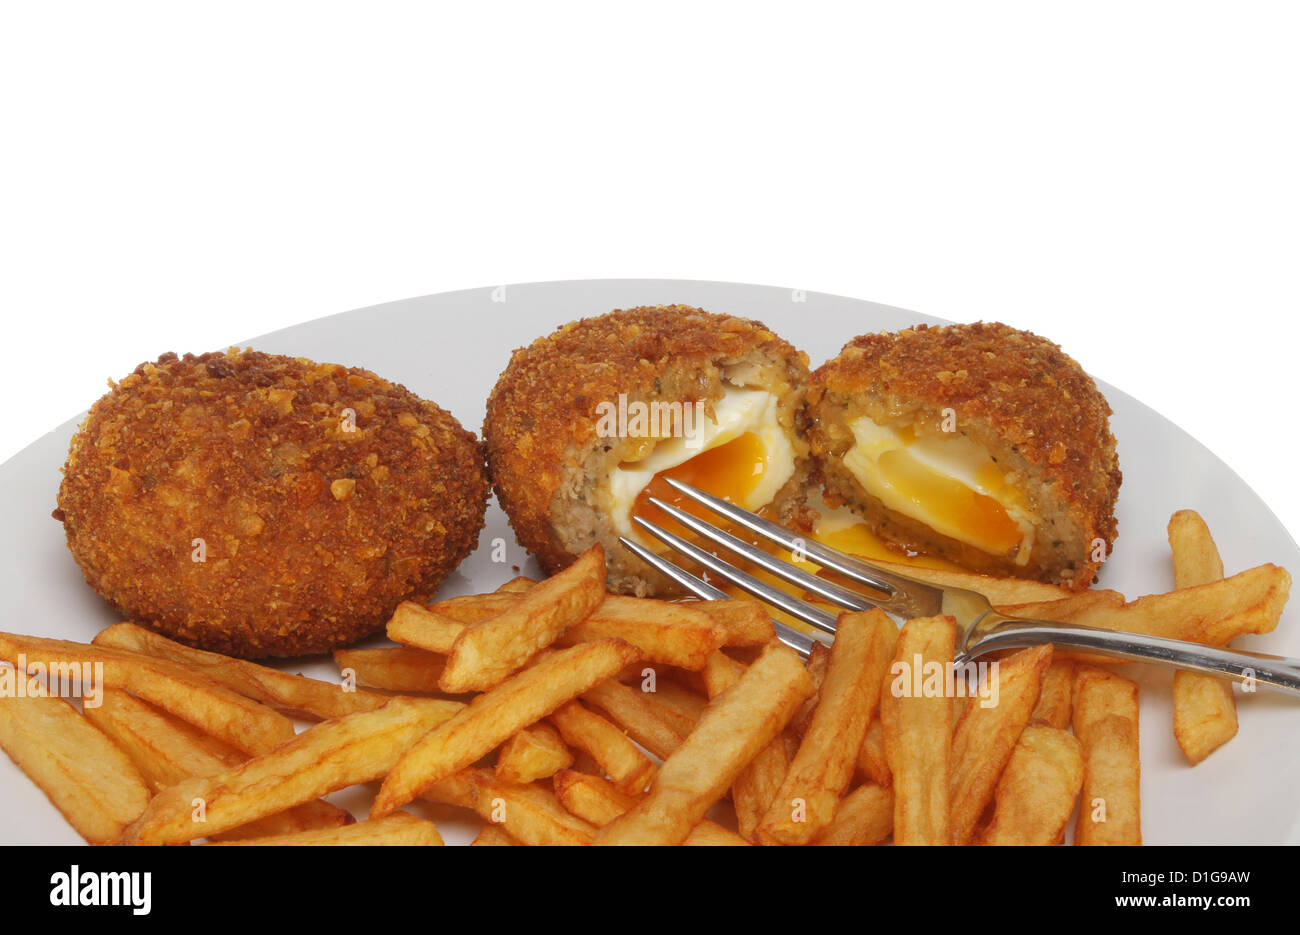 Runny yolk Scotch eggs and chips with a fork on a plate Stock Photo